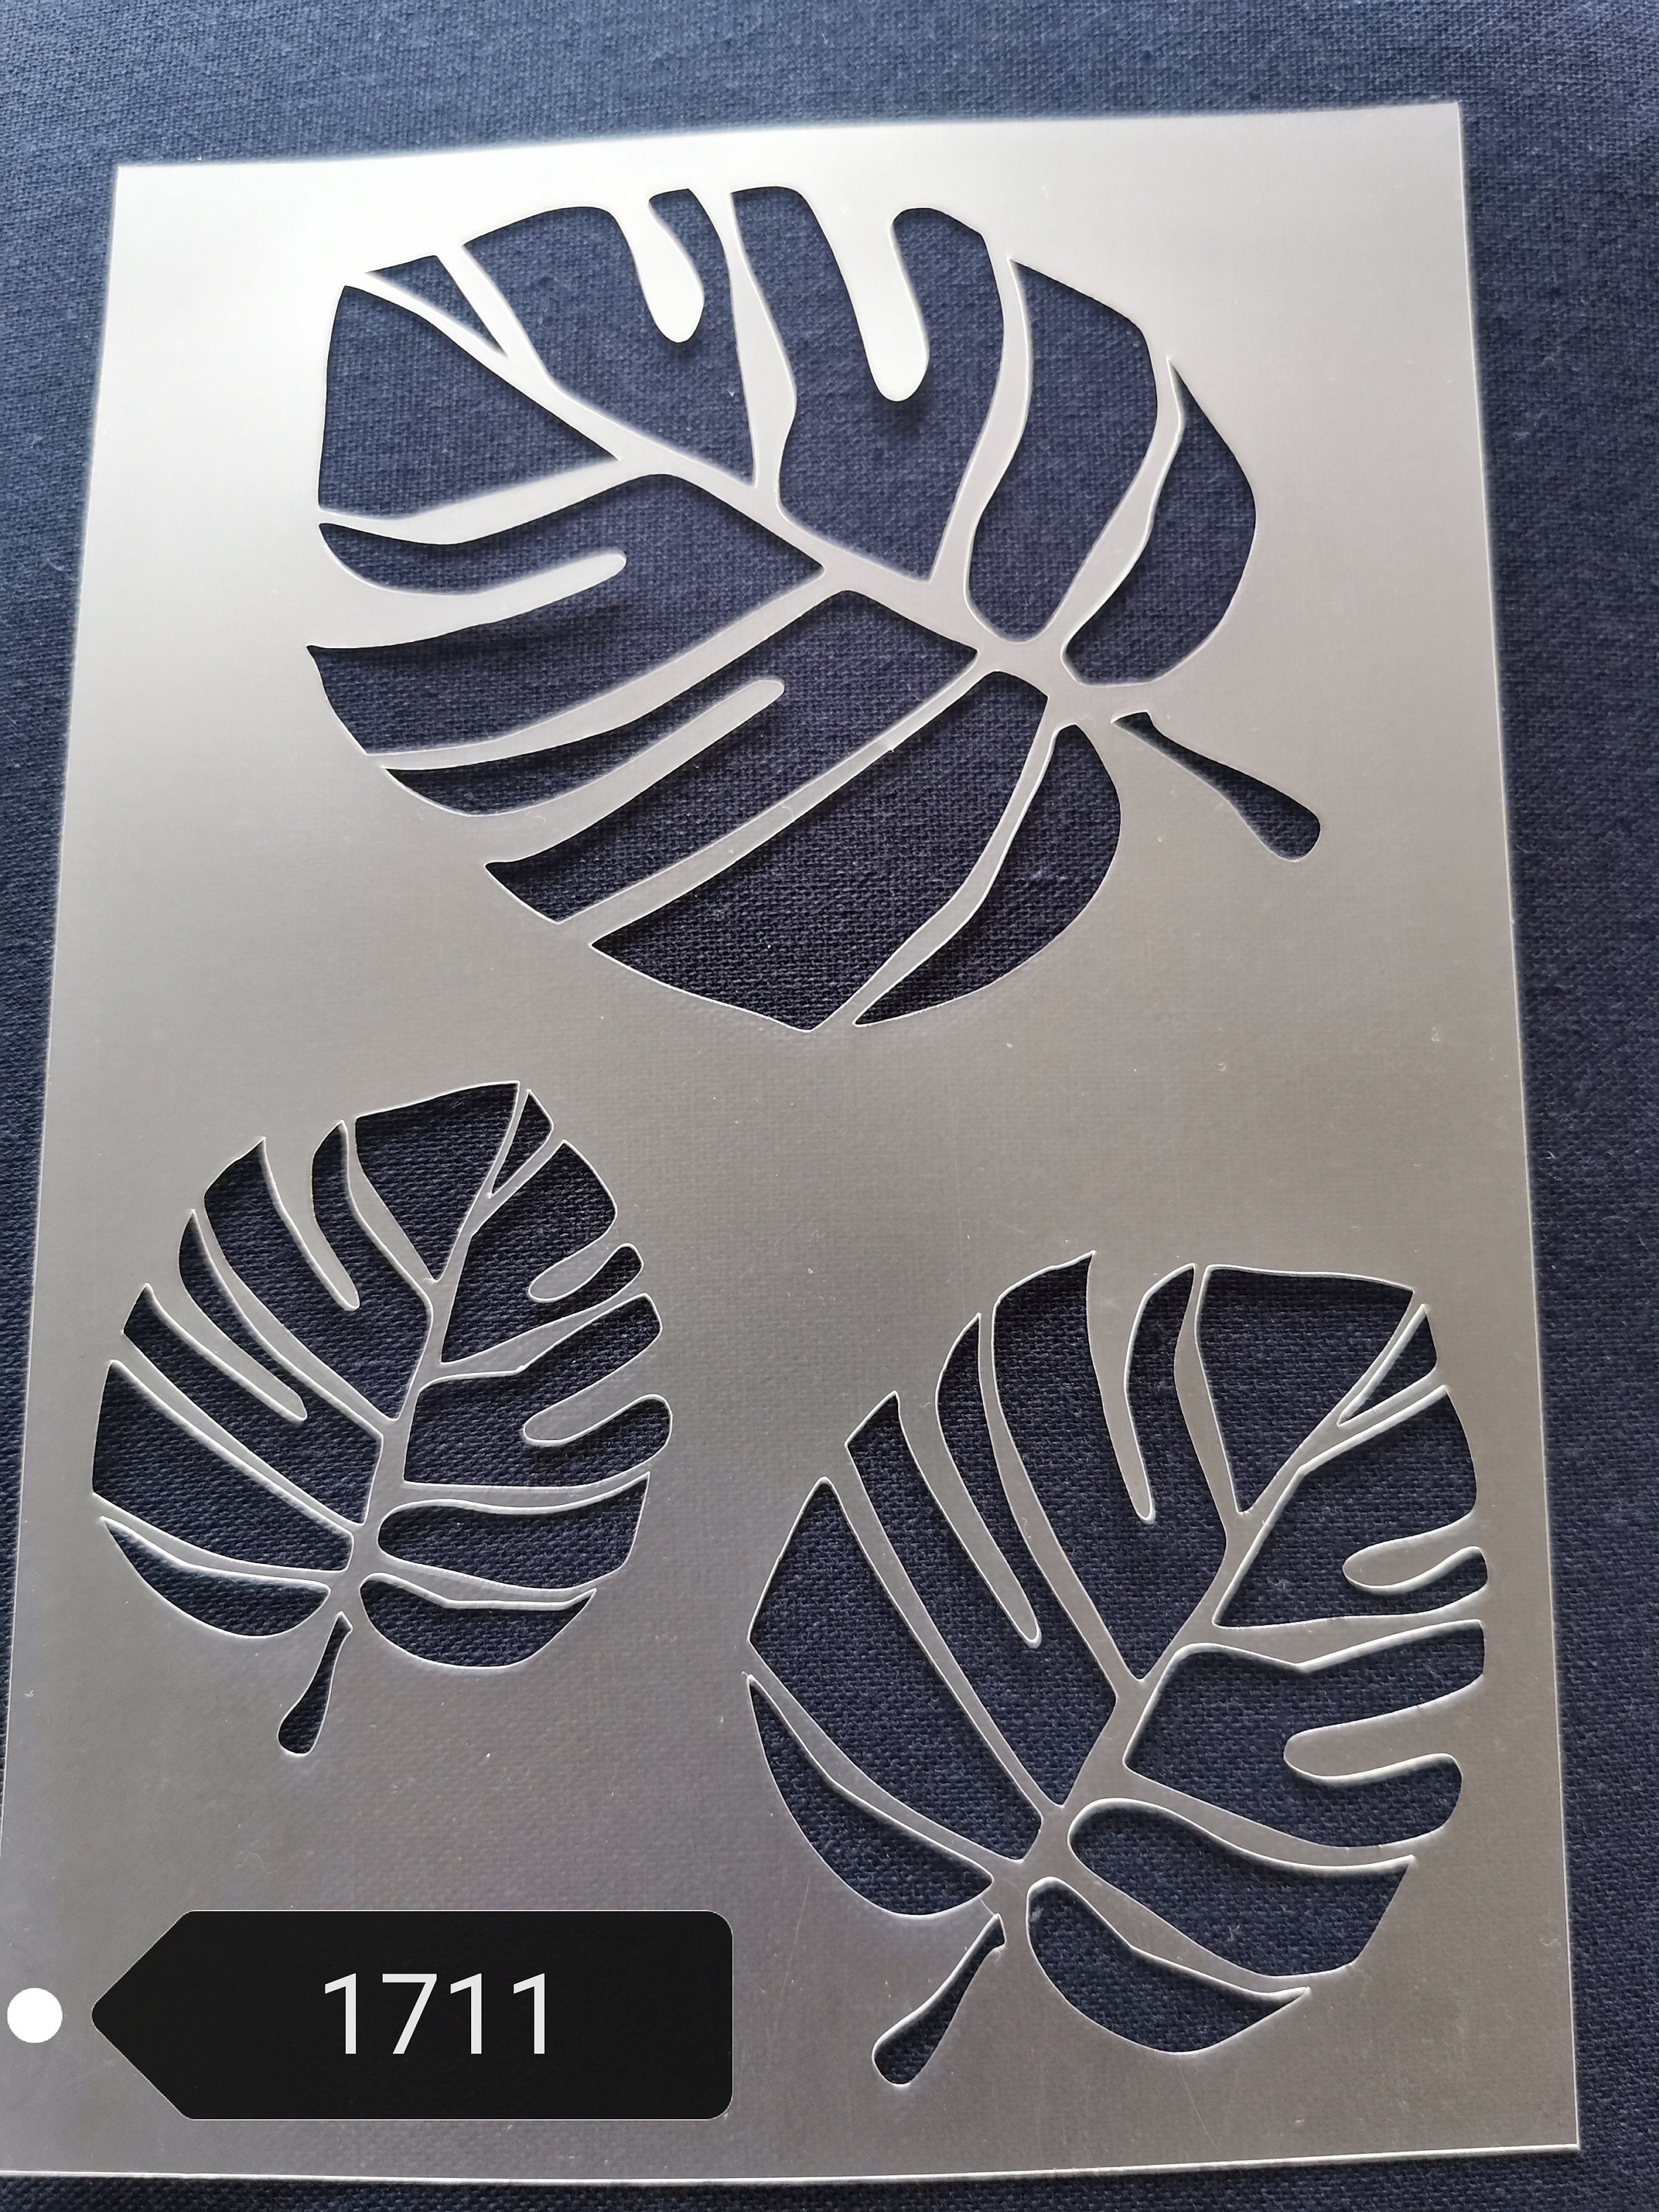 Plant stencil sign making home decor wall decor reusable furniture painting flexible stencils washable